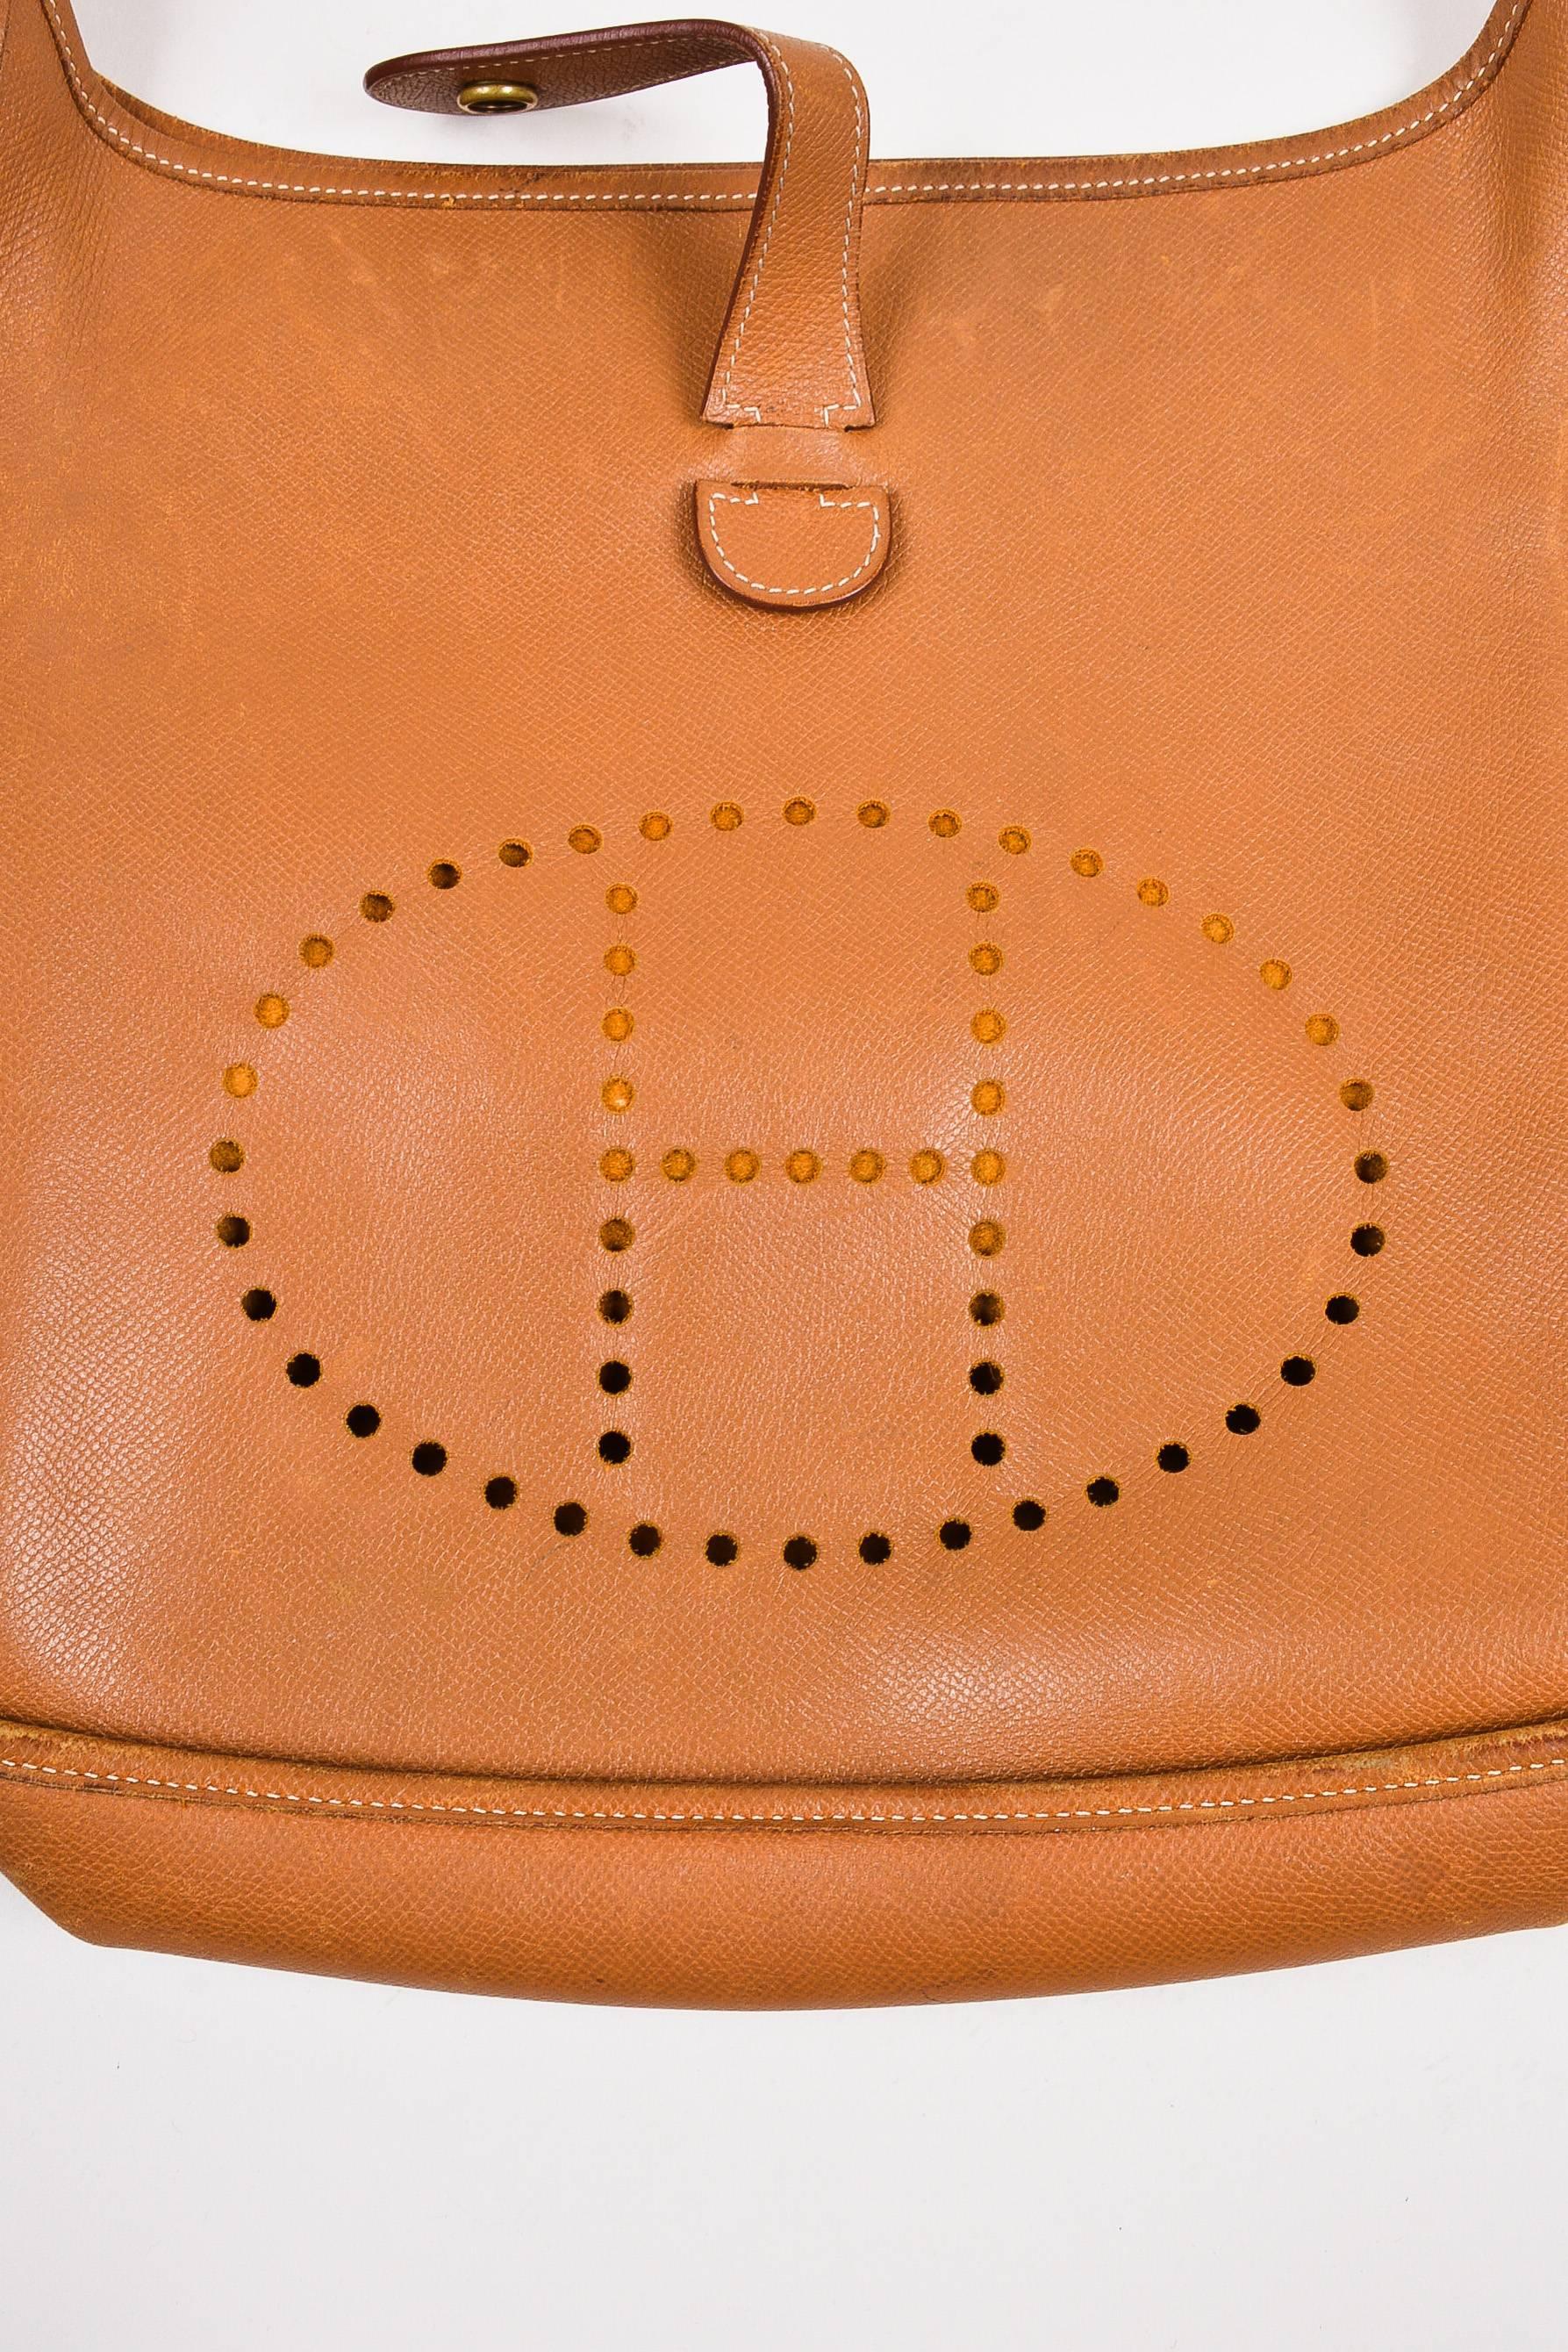 Hermes 'Gold' Brown Courchevel Leather 